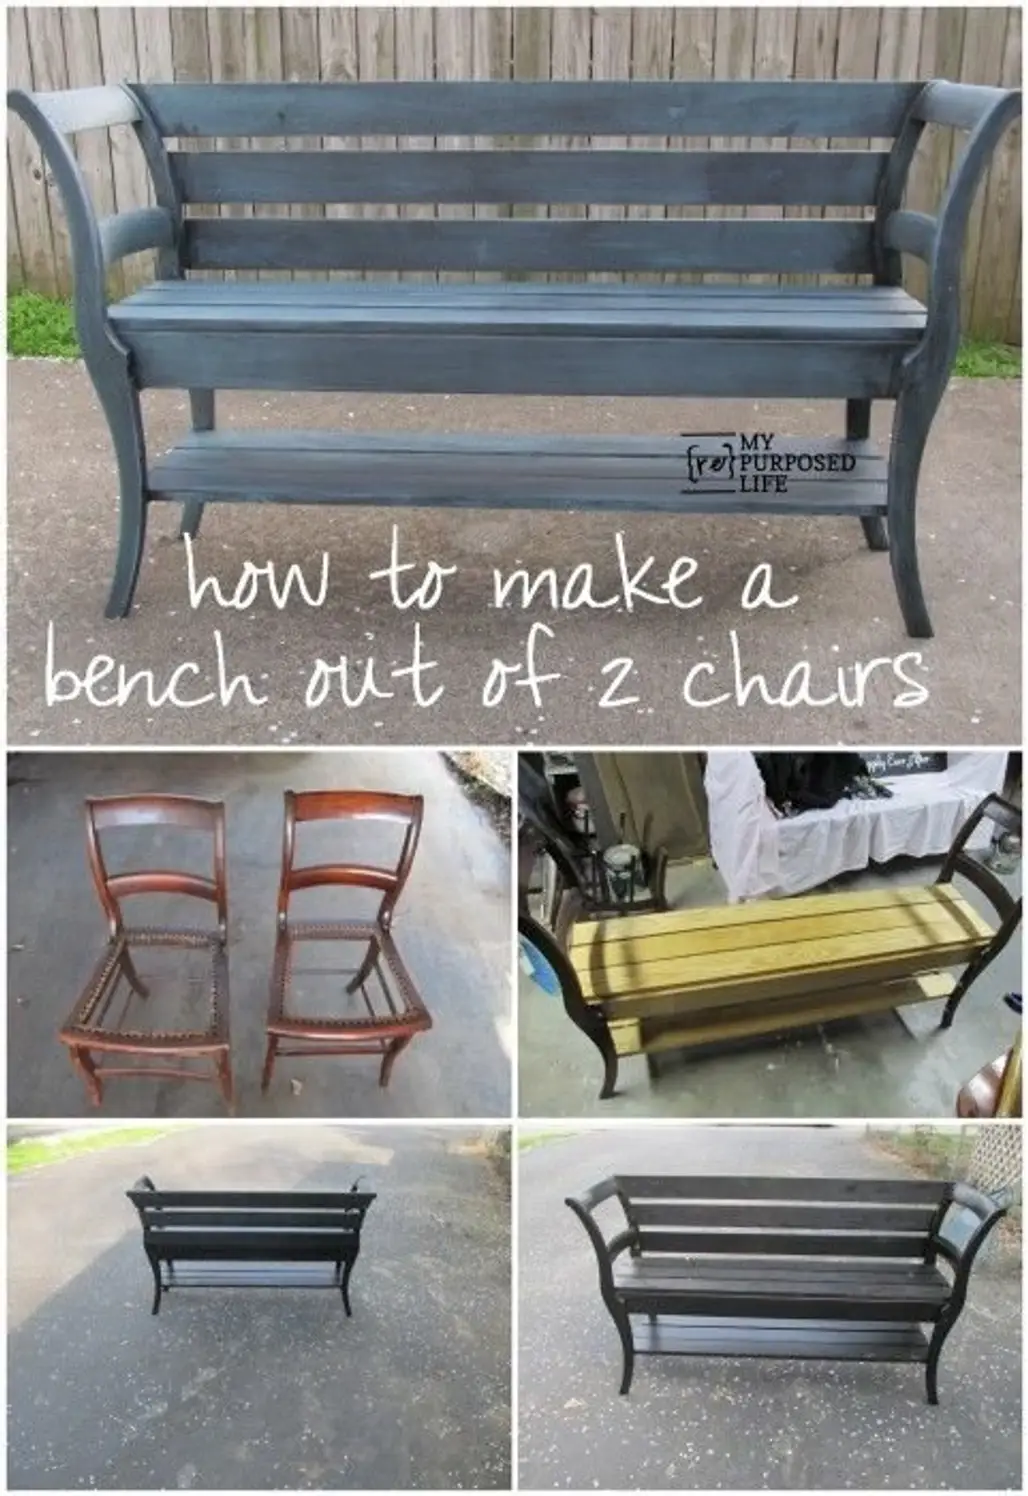 furniture,man made object,bench,iron,chair,